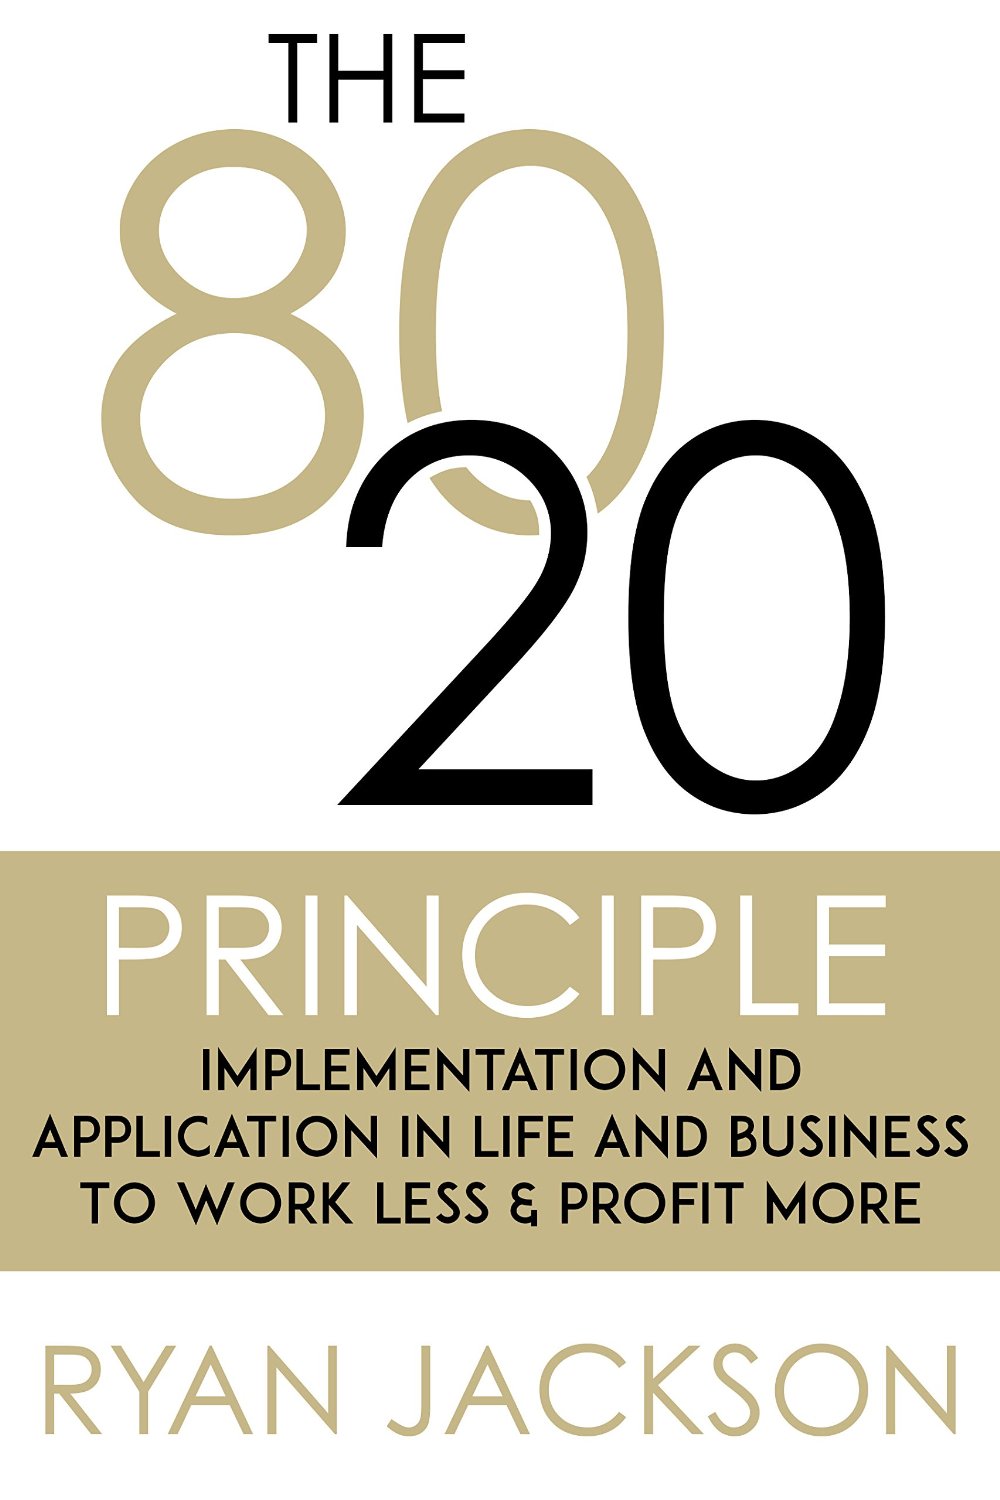 FREE: The 80/20 Principle: Implementation and Application In Life And Business To Work Less & Profit More by Ryan Jackson